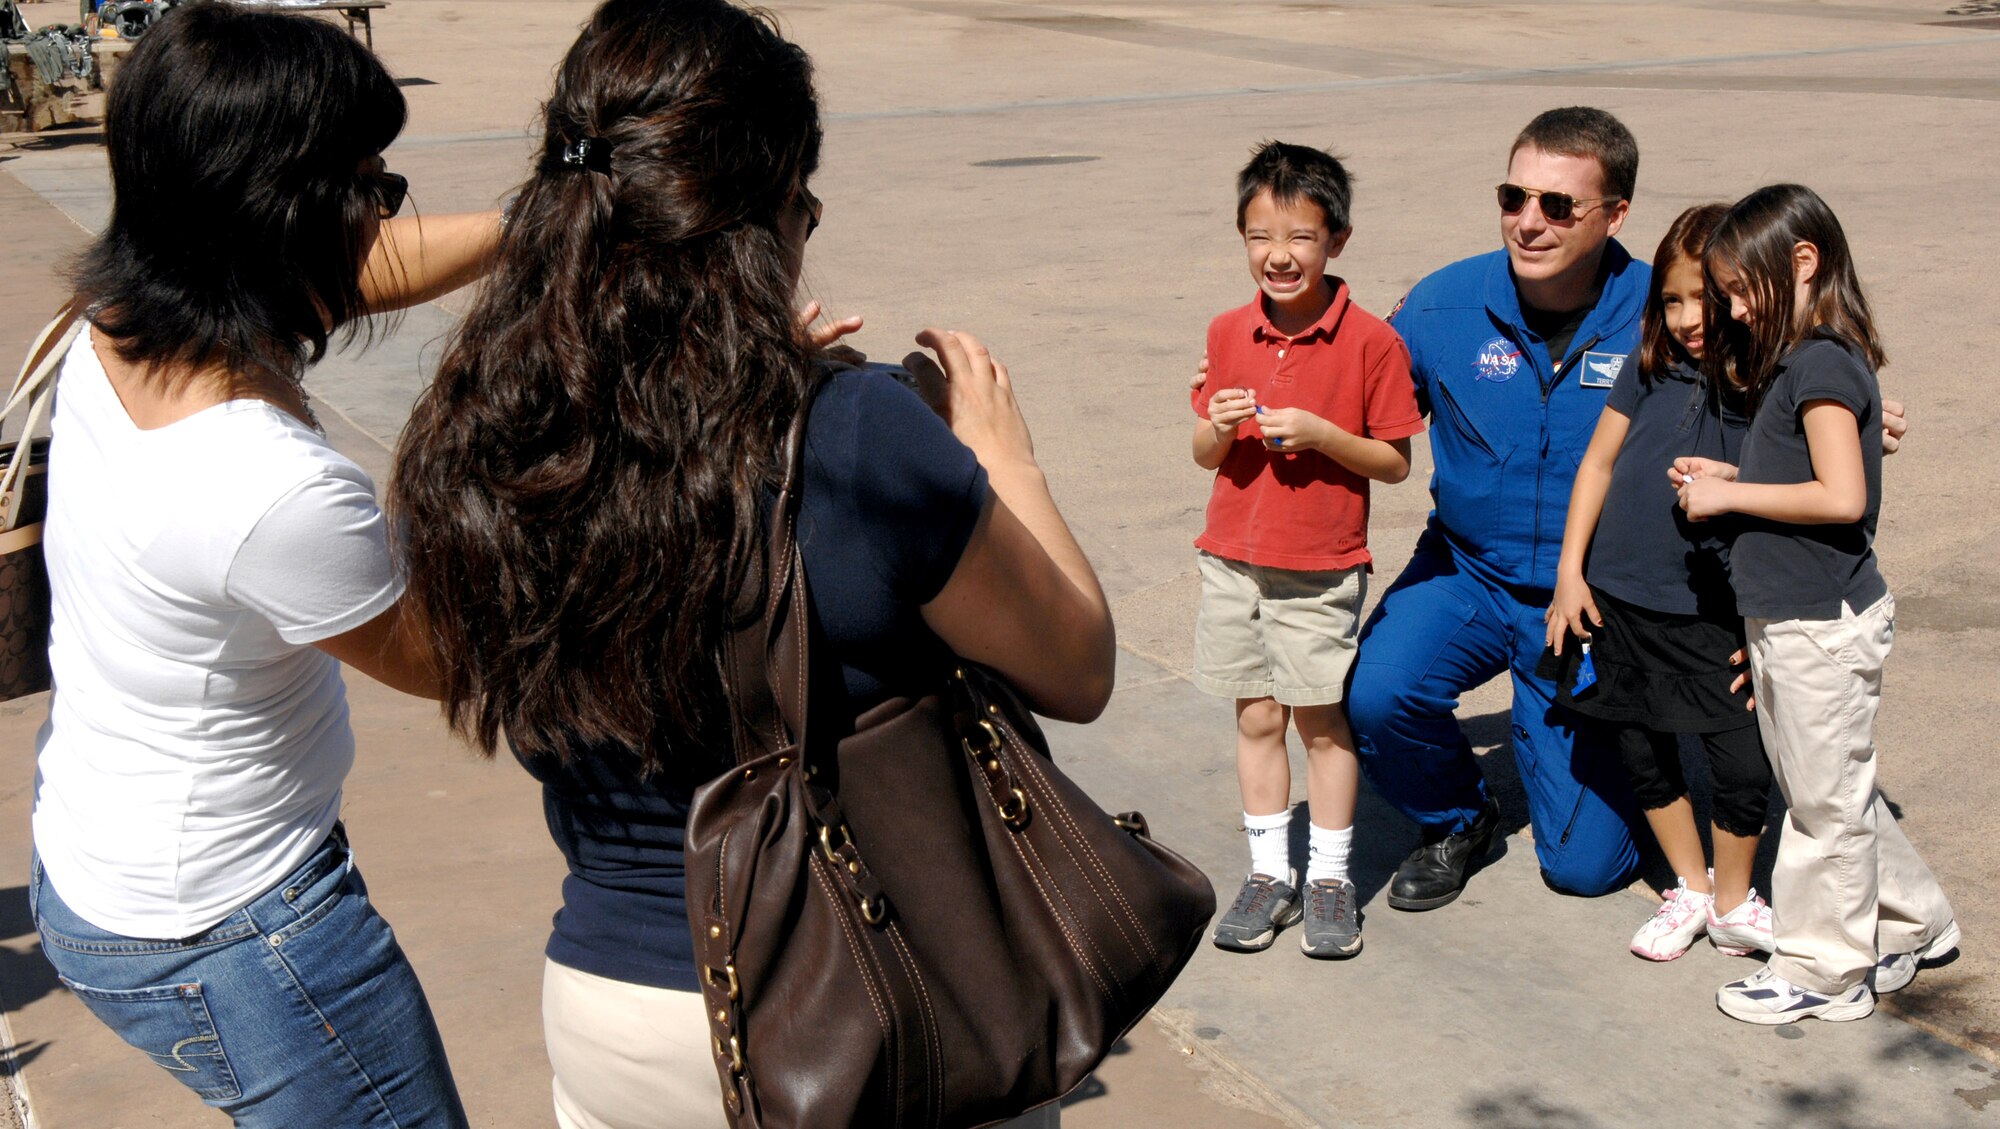 NASA Astronaut Lt. Col. Terry Virts pauses for a photograph March 20 during Air Force Week at the Arizona Science Center in downtown Phoenix.  Colonel Virts signed autographs and answered questions about his role as an astronaut and Air Force member.  (U.S. Air Force photo/Staff Sgt. Brian Ferguson)